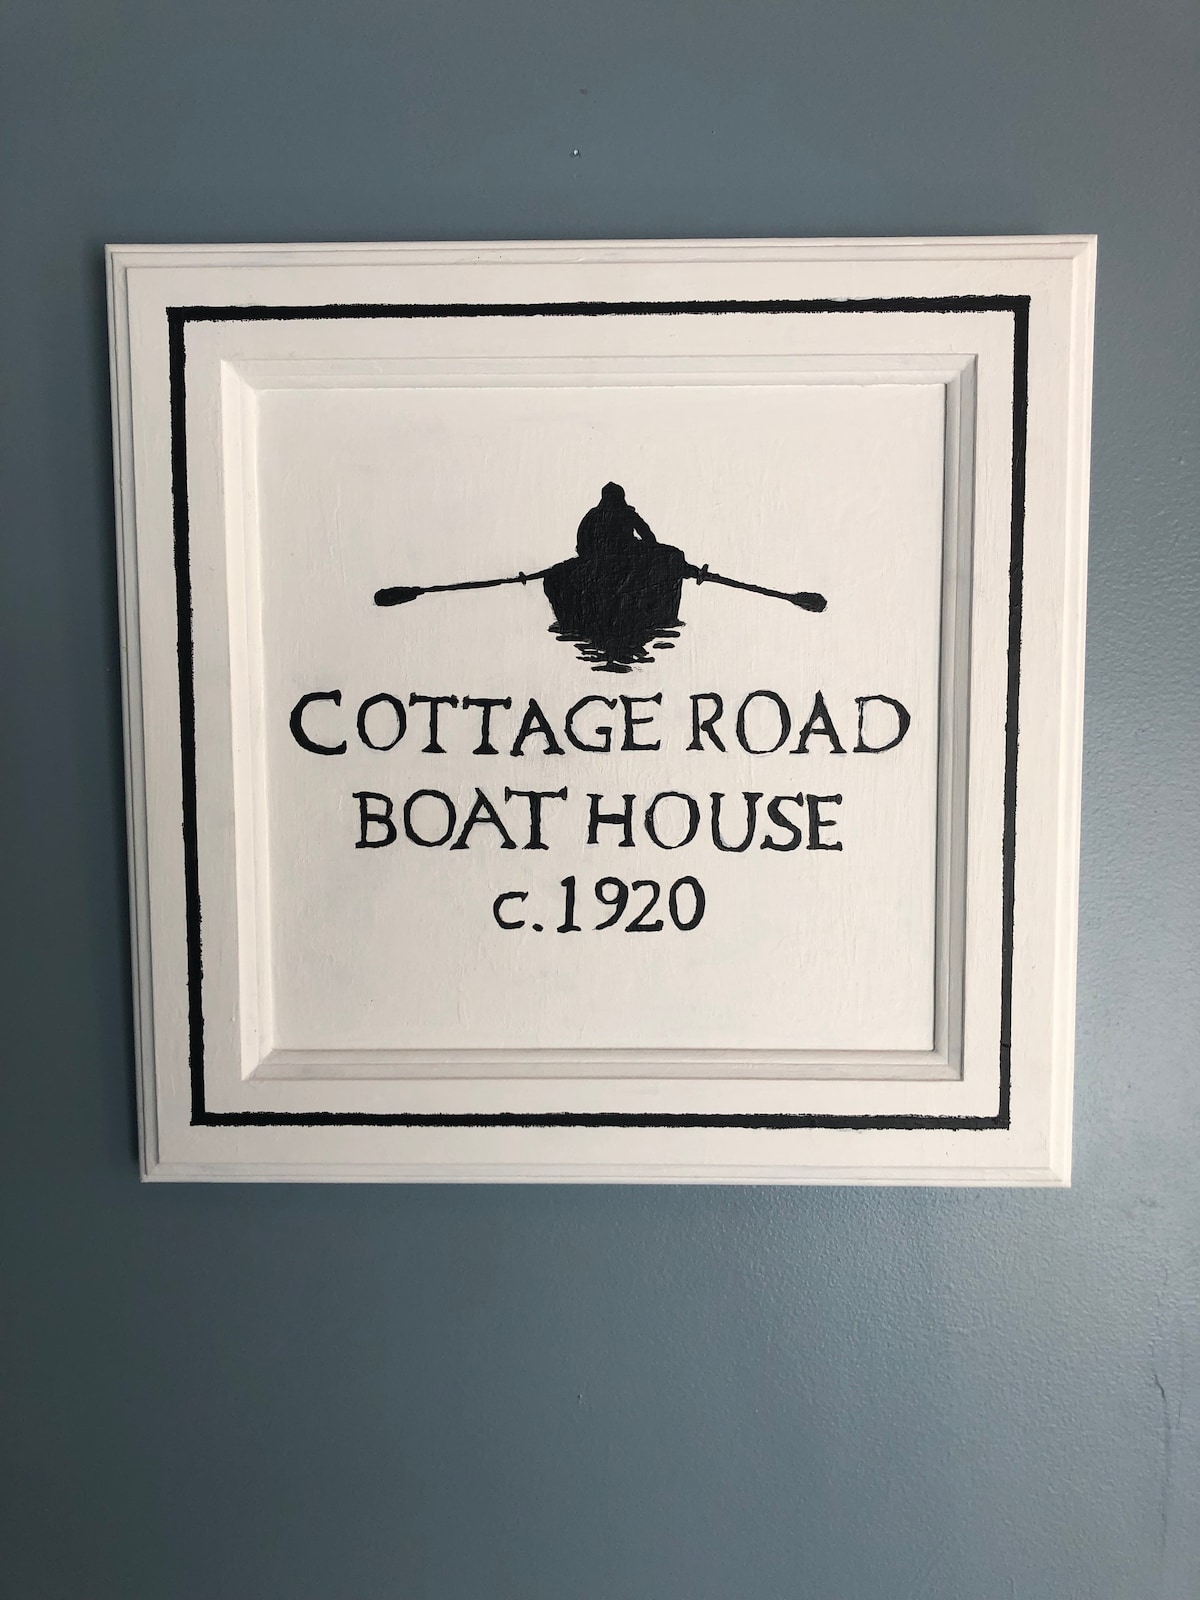 Cottage Road Boat House